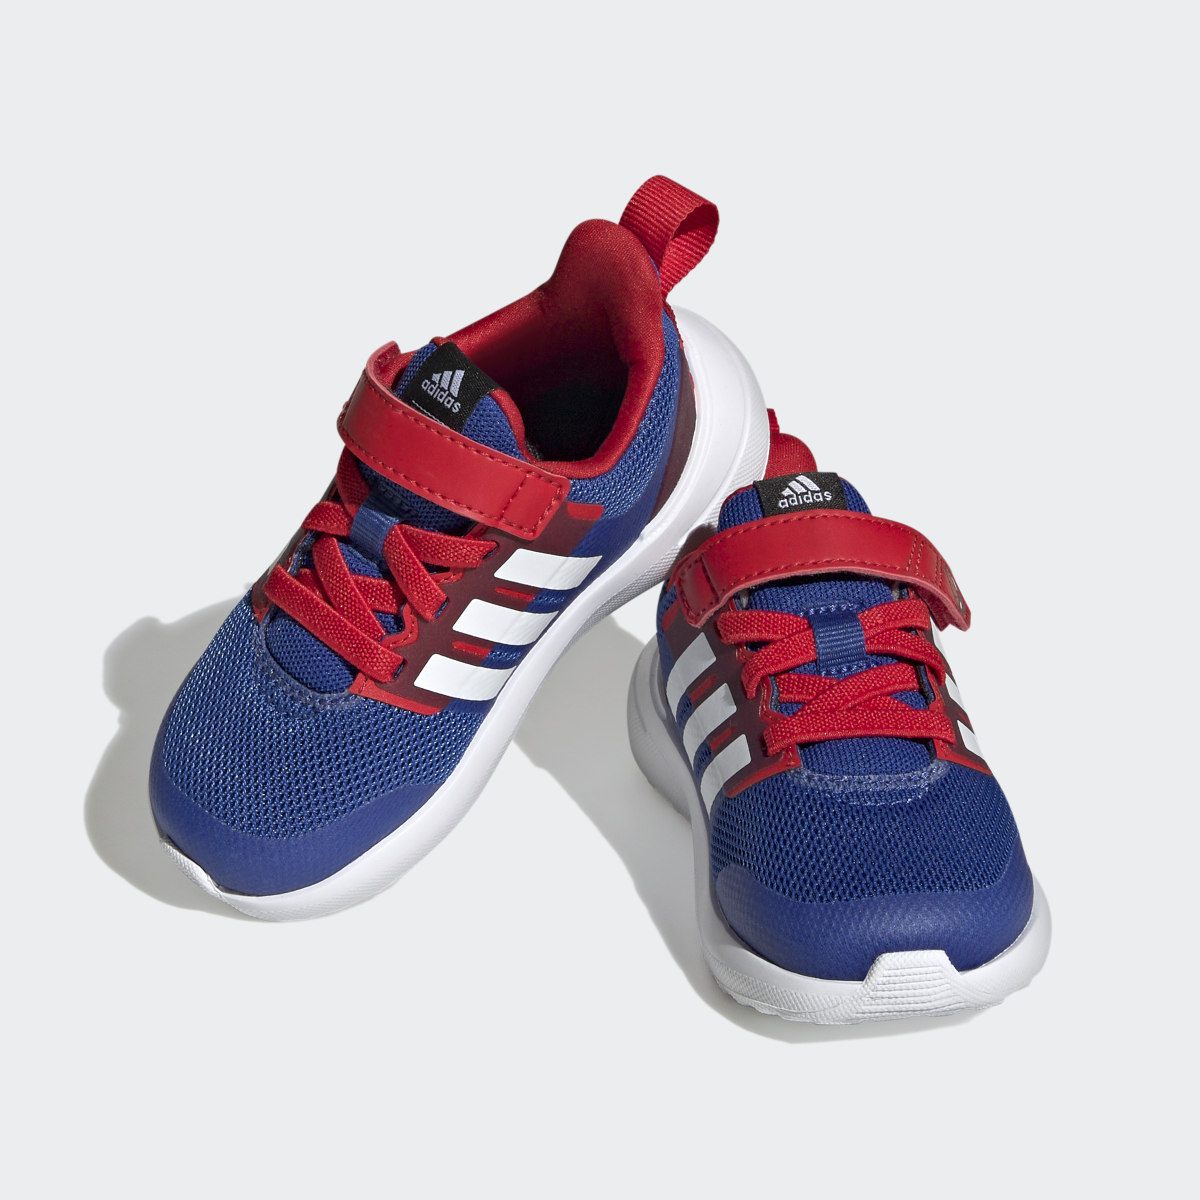 Adidas x Marvel FortaRun 2.0 Spider-Man Cloudfoam Sport Running Elastic Lace Top Strap Shoes. 5